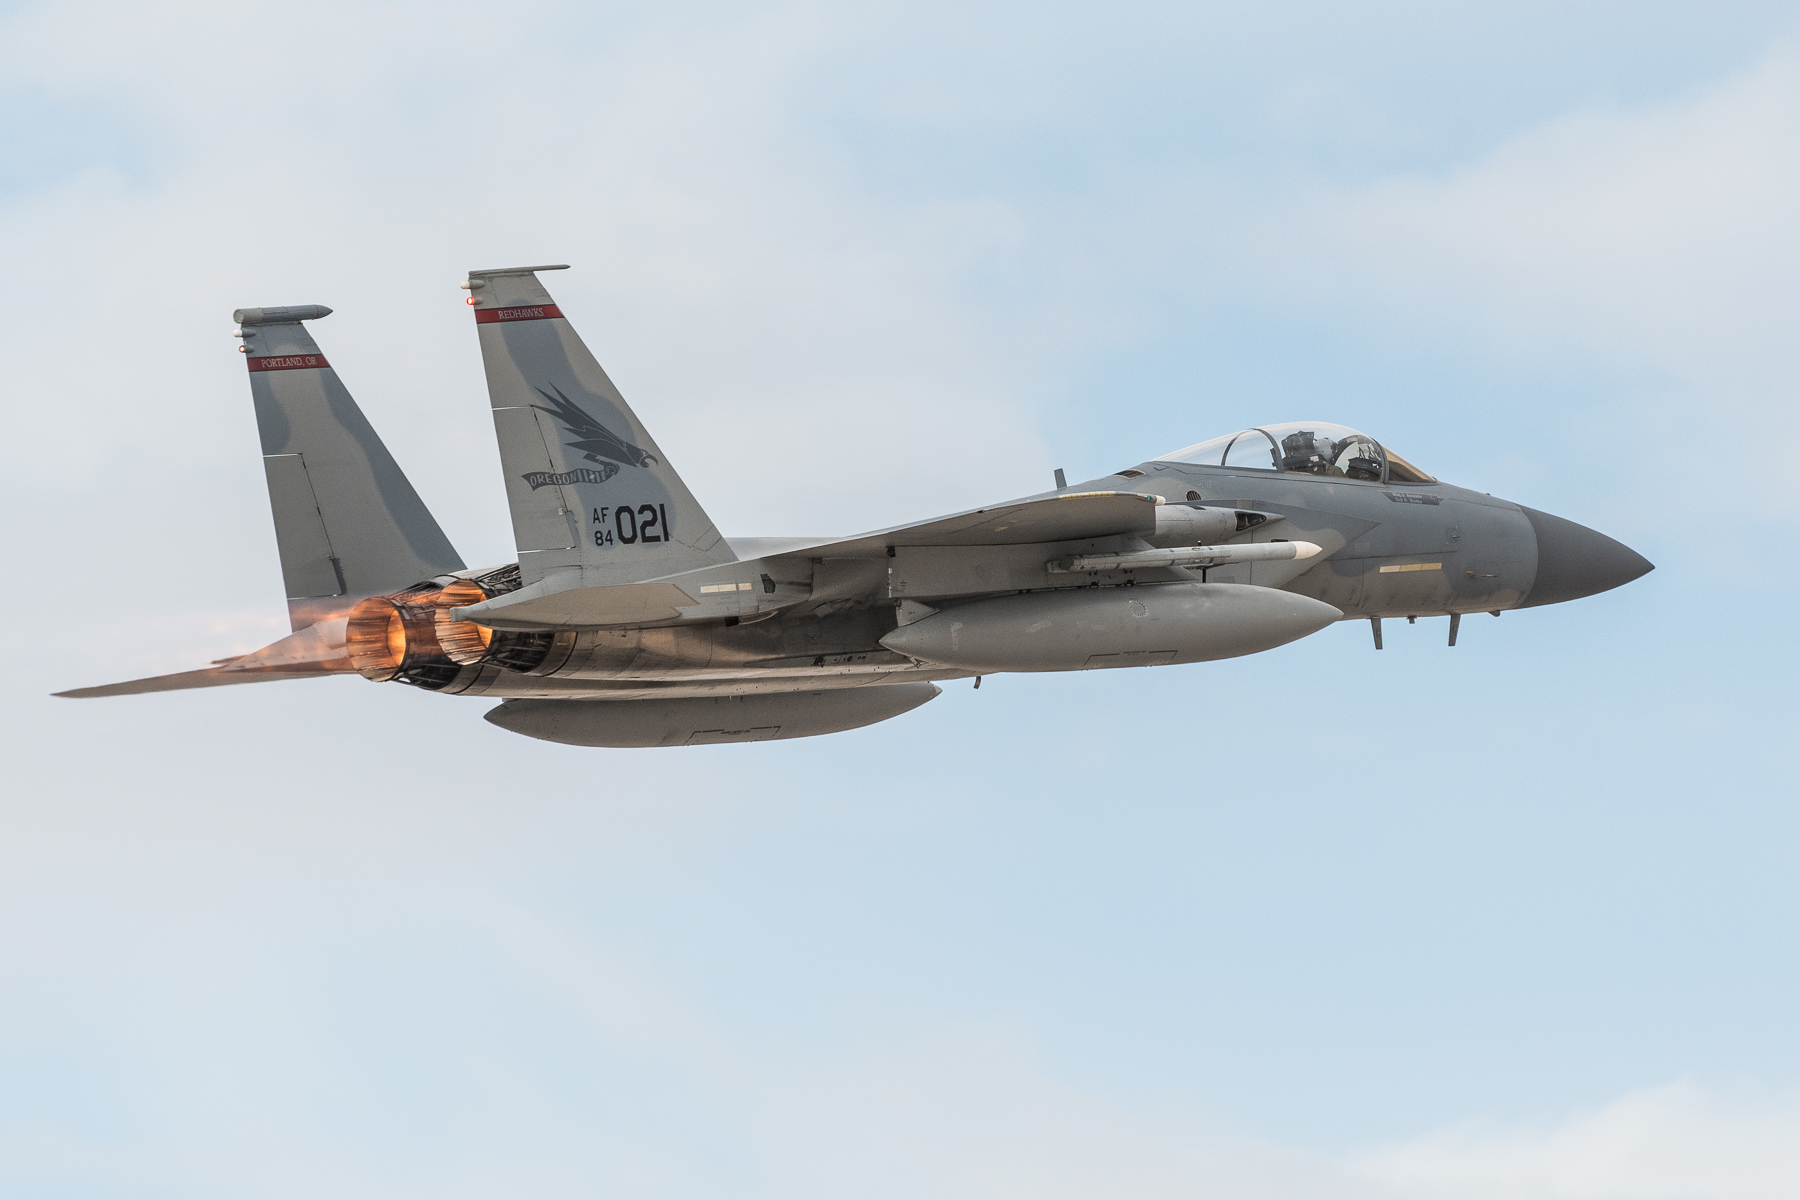 Exercise Red Flag 18-1 Nellis Air Force Base